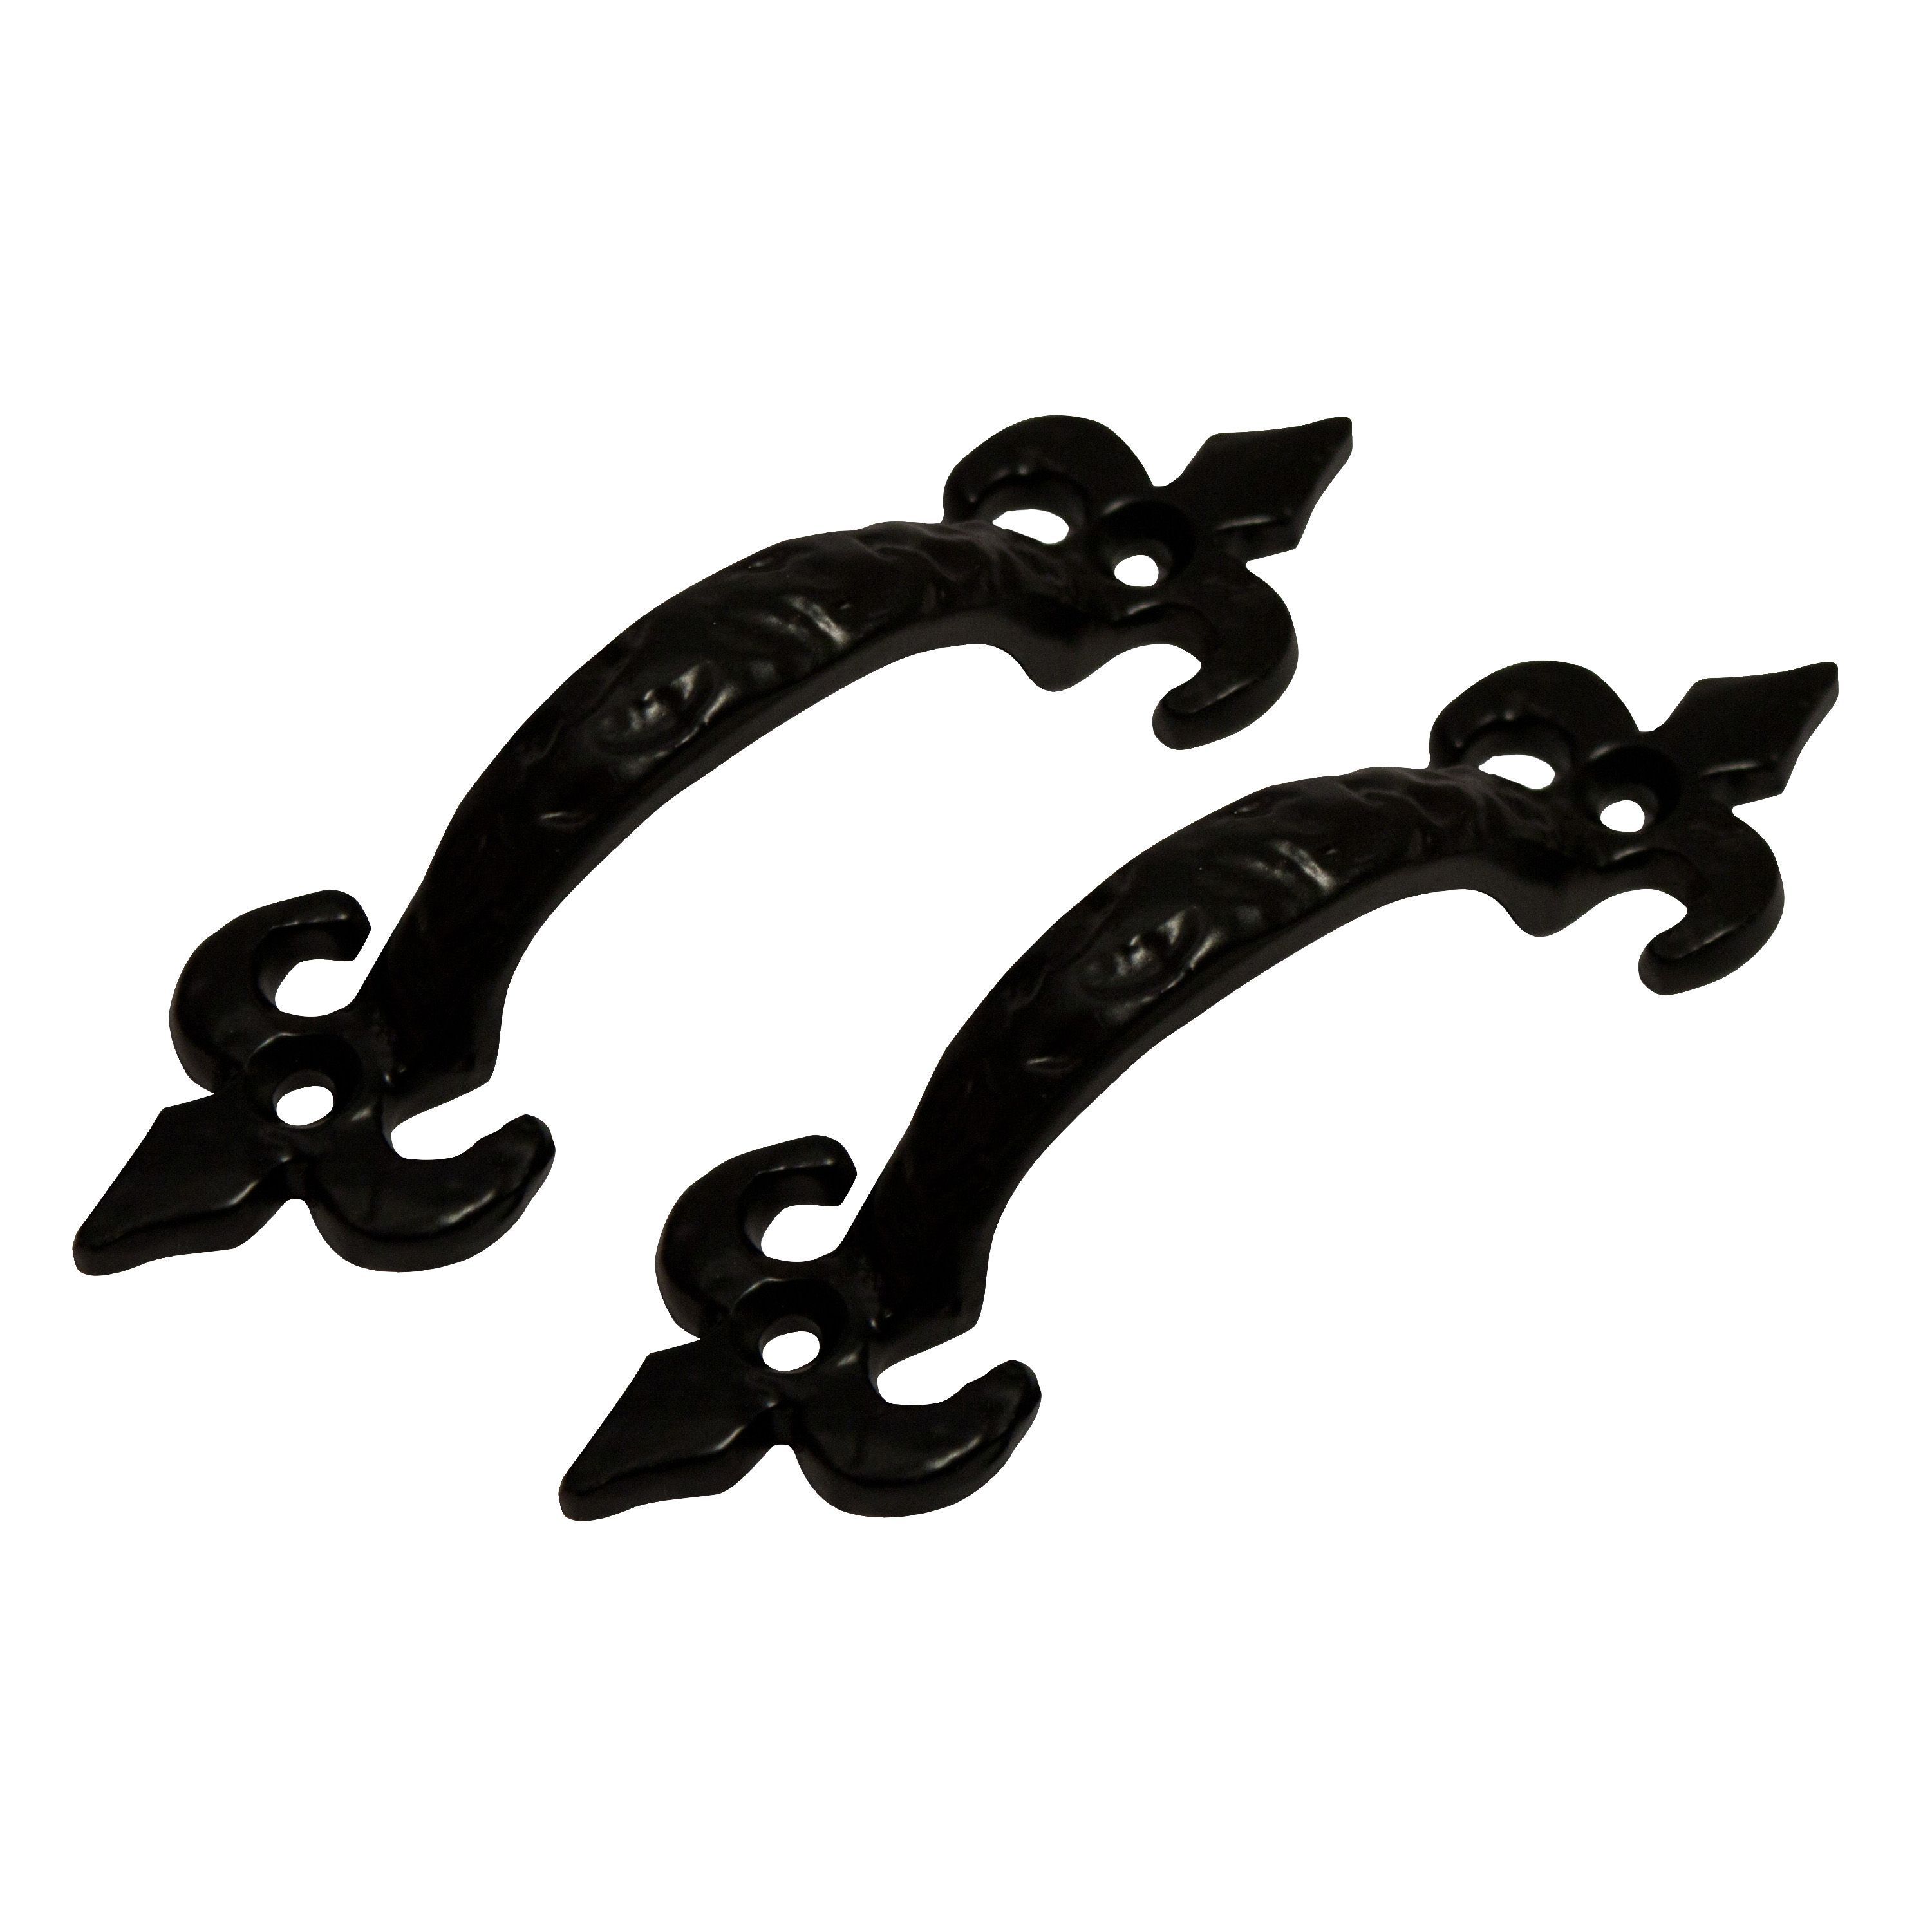 Blooma Black Antique effect Cast iron Gate Pull handle, Pack of 2